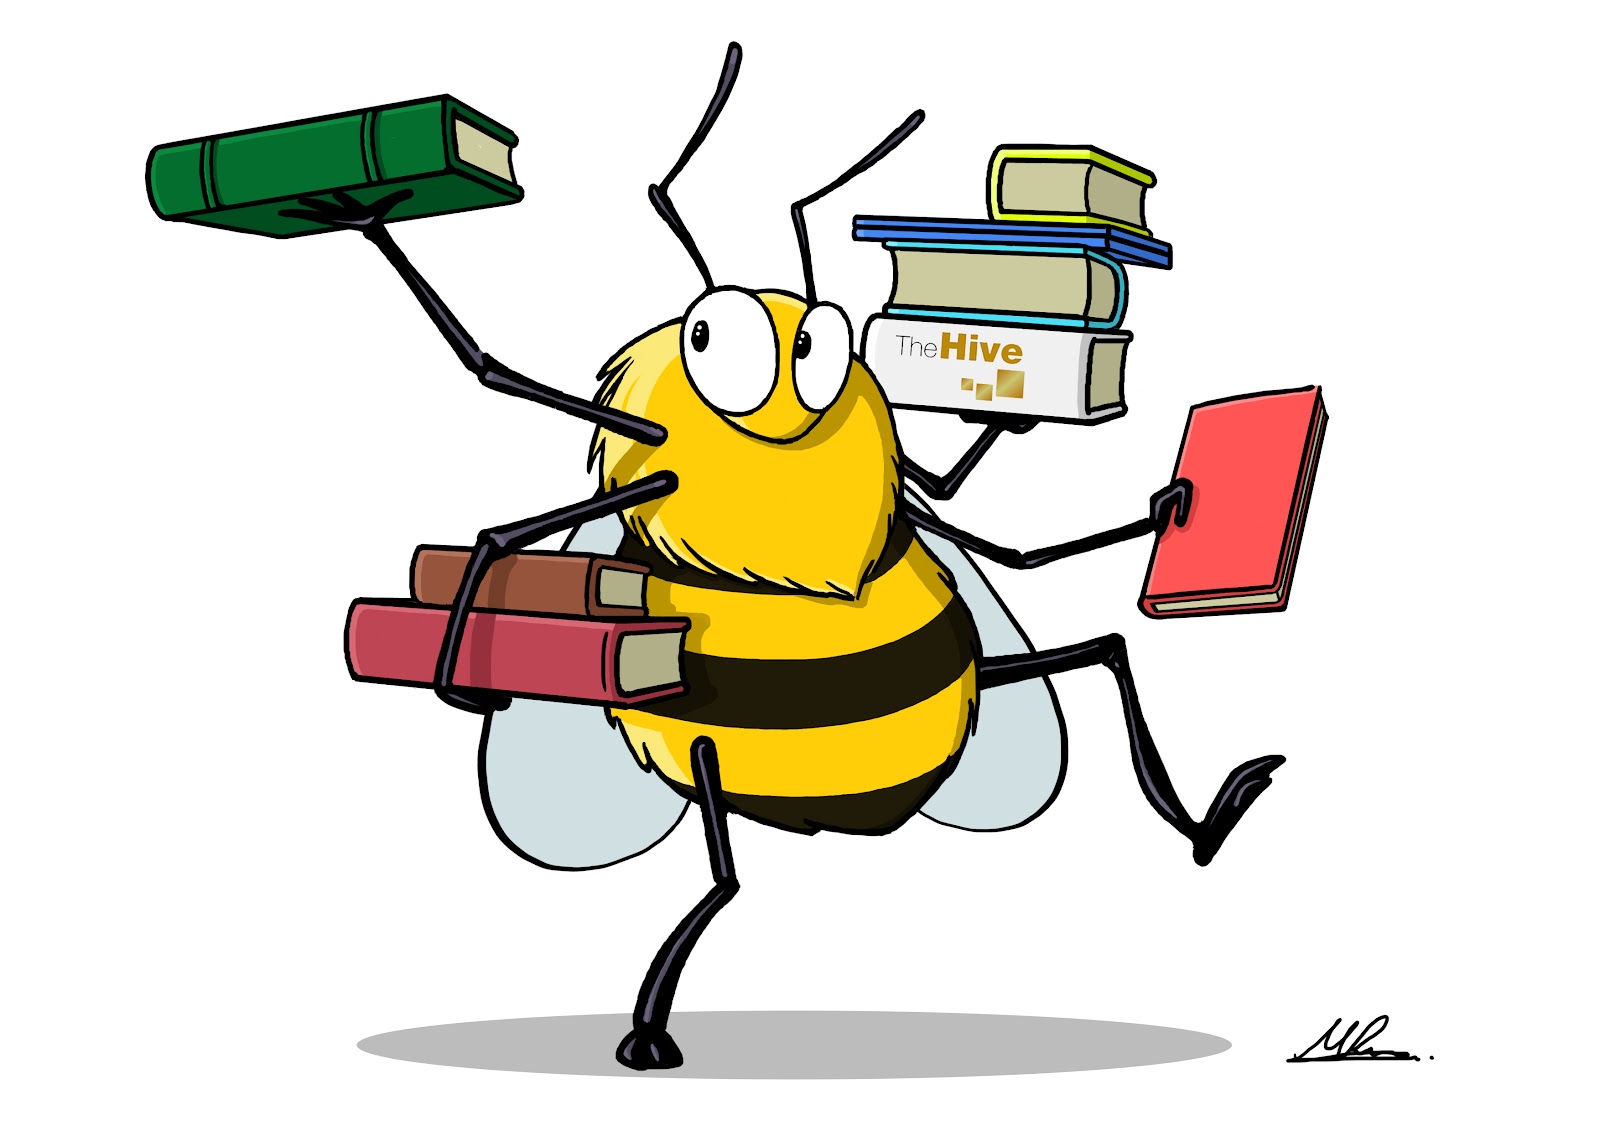 Michael's Animation Blog: The Hive Worcester- it's the bees knees!